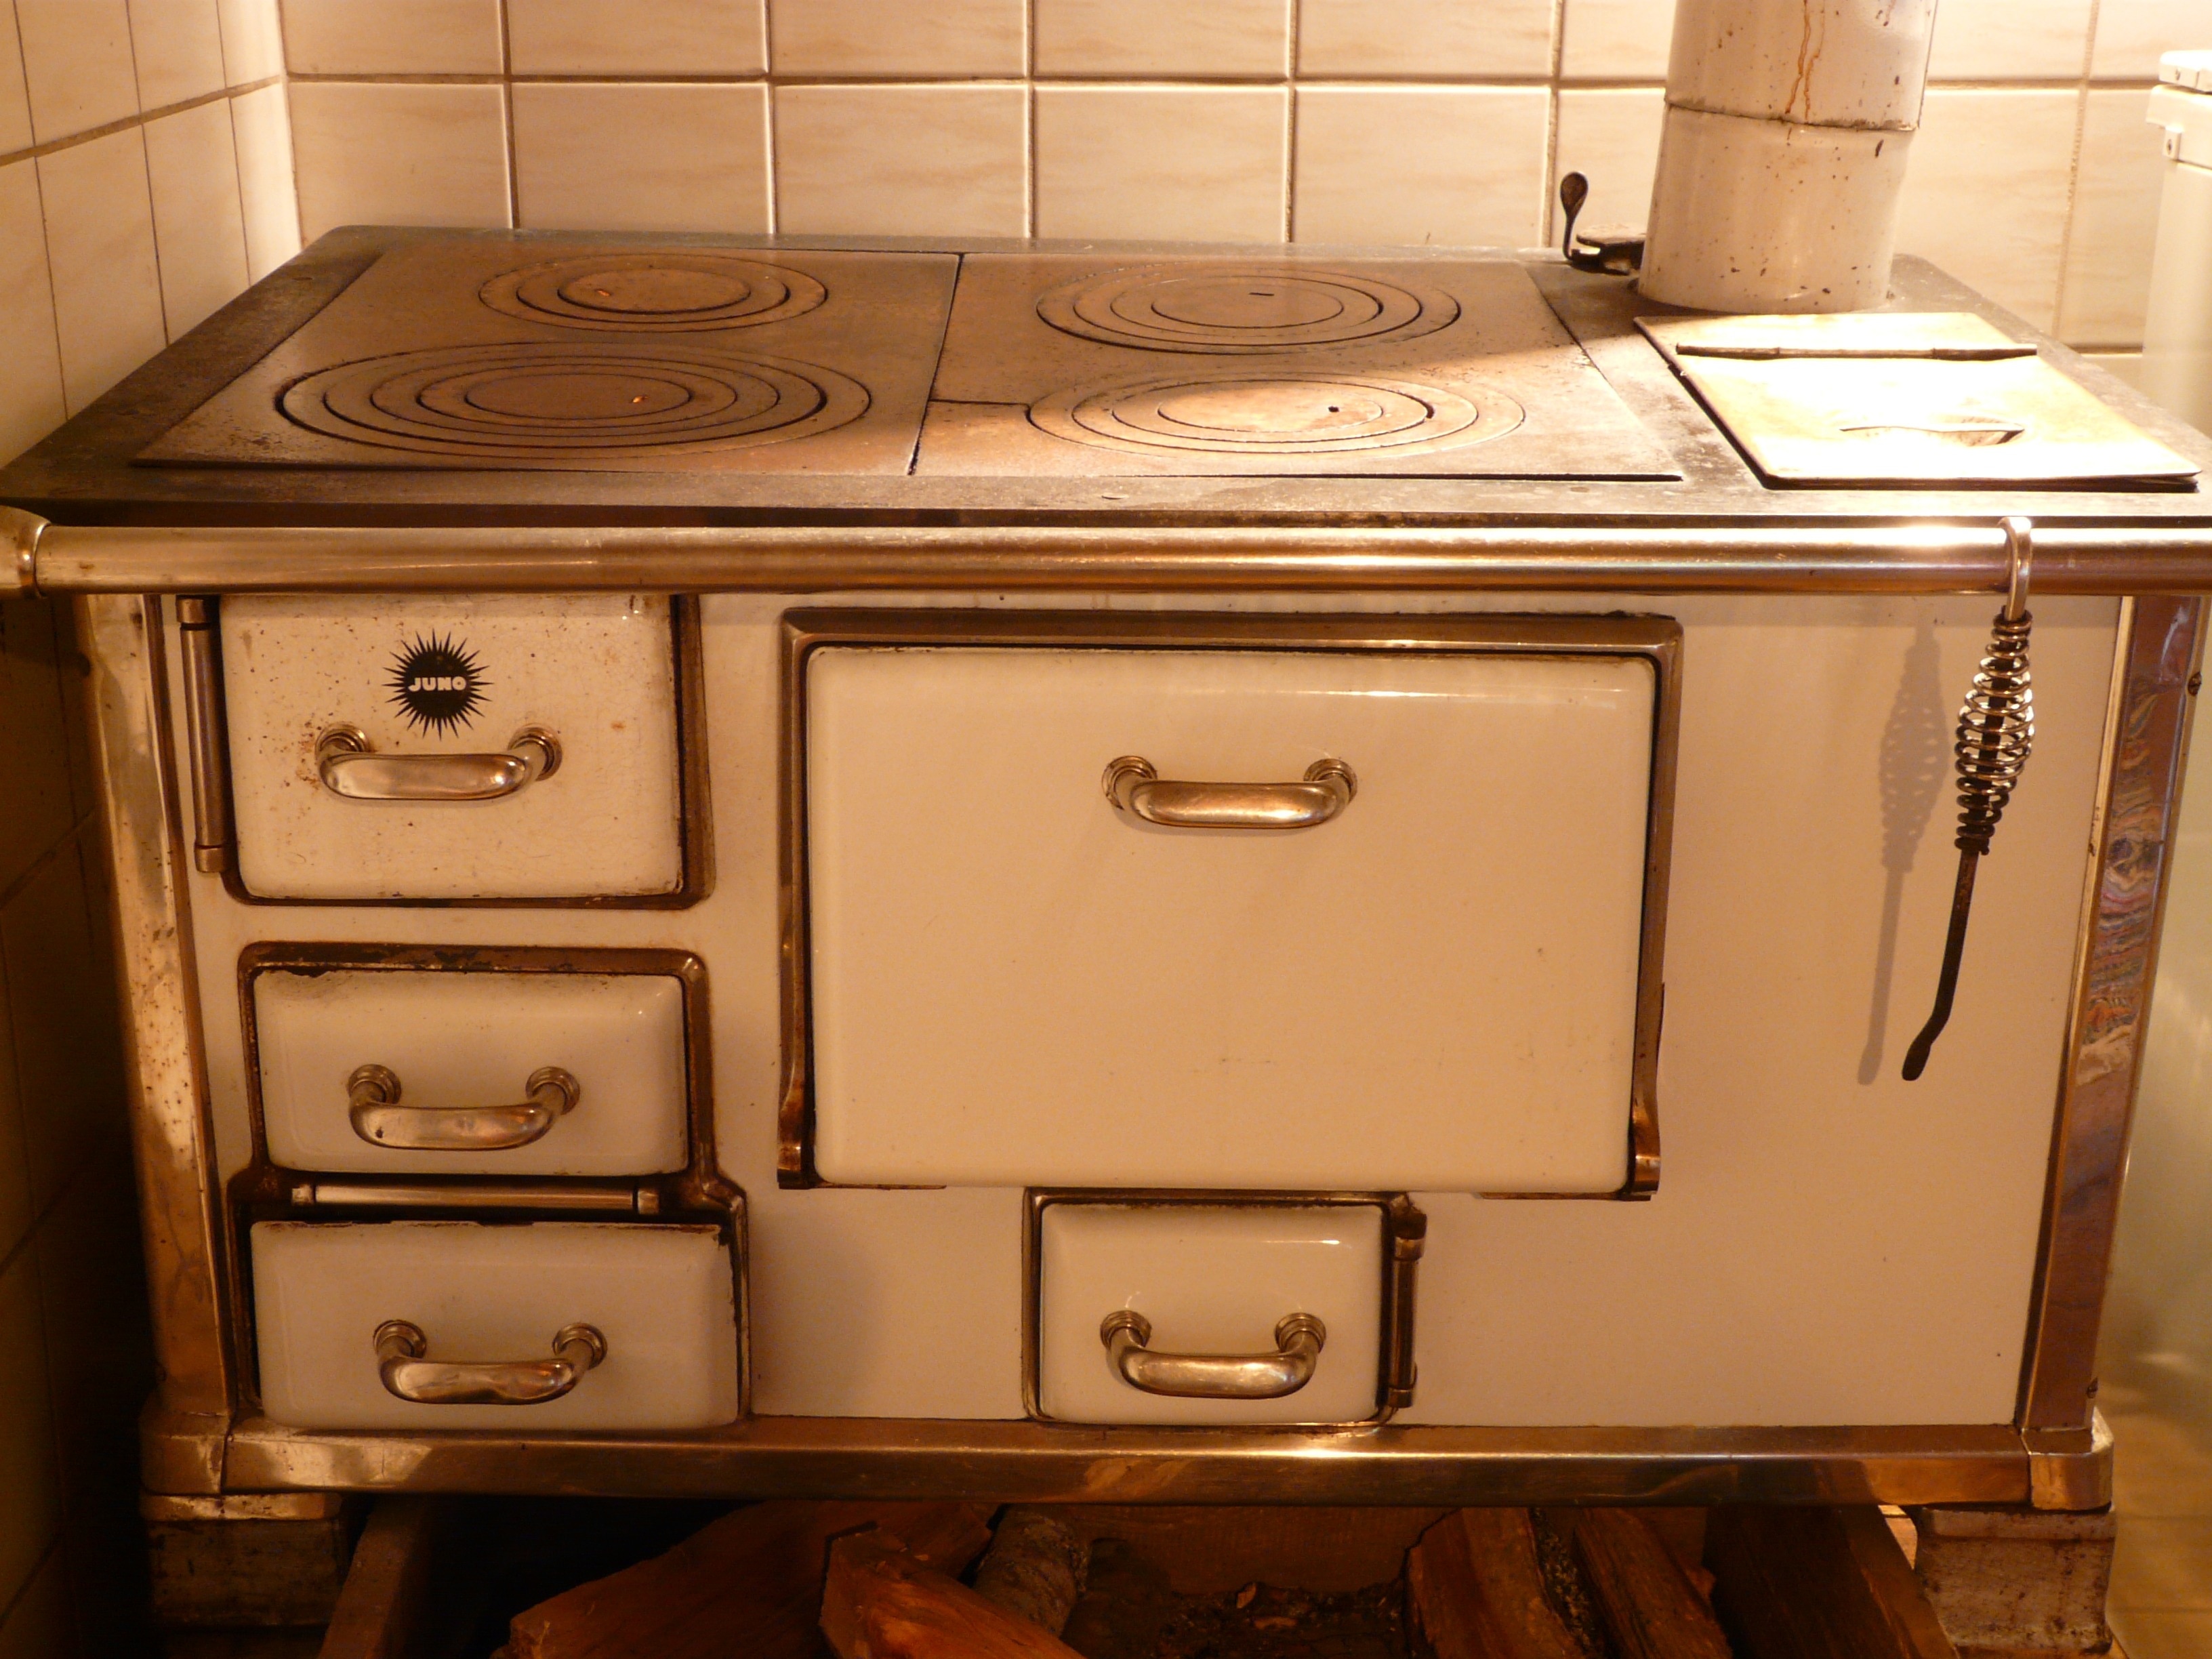 white and stainless steel stove oven